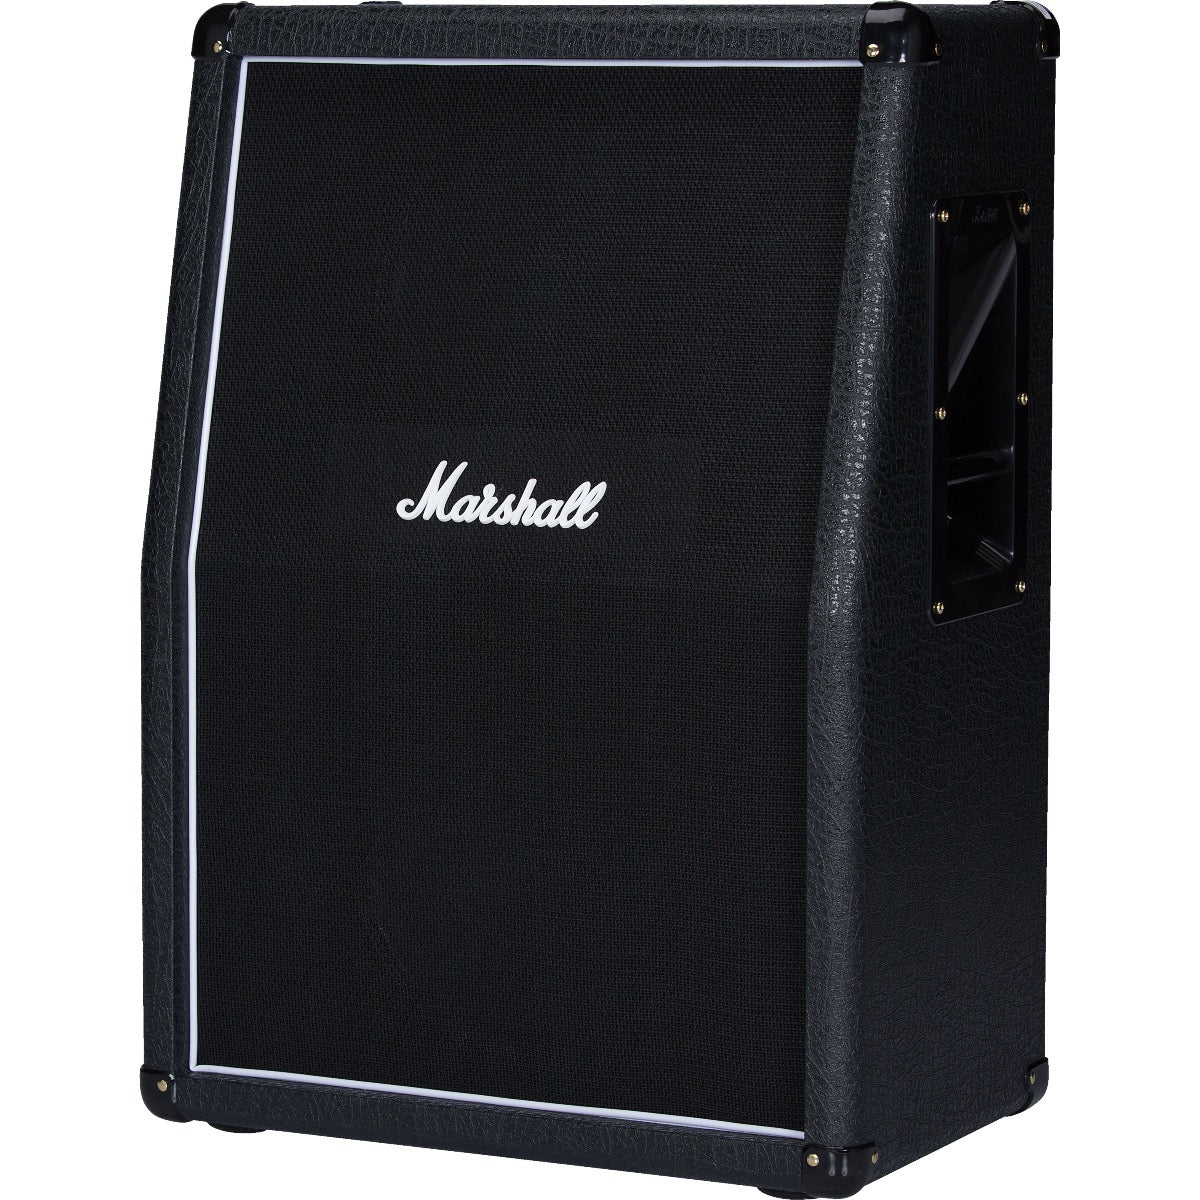 Perspective view of Marshall SC212 Studio Classic 2x12 Angled Speaker Cabinet showing front and right side